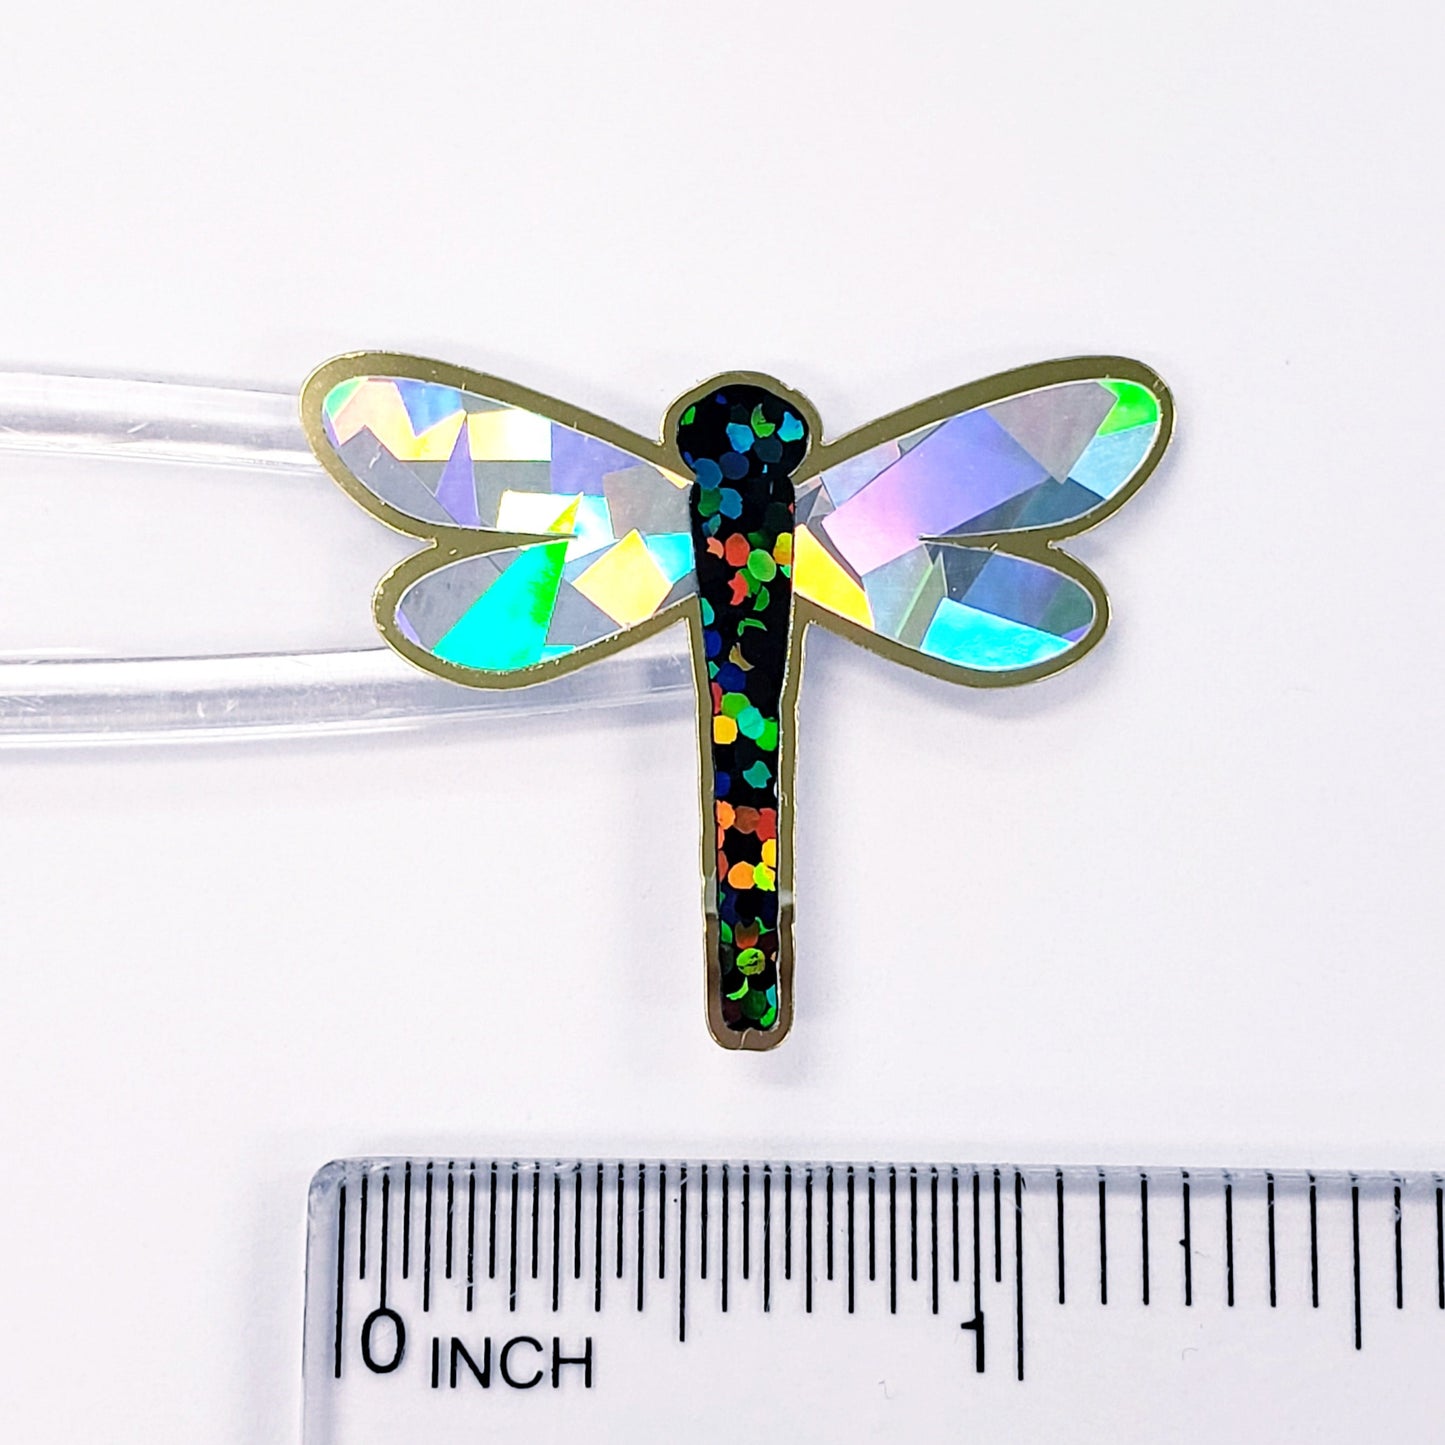 Dragonfly Stickers, set of 4, 8 or 12 sparkly handmade black and gold glitter stickers for cards, journals and scrapbooks. Dragonfly gift